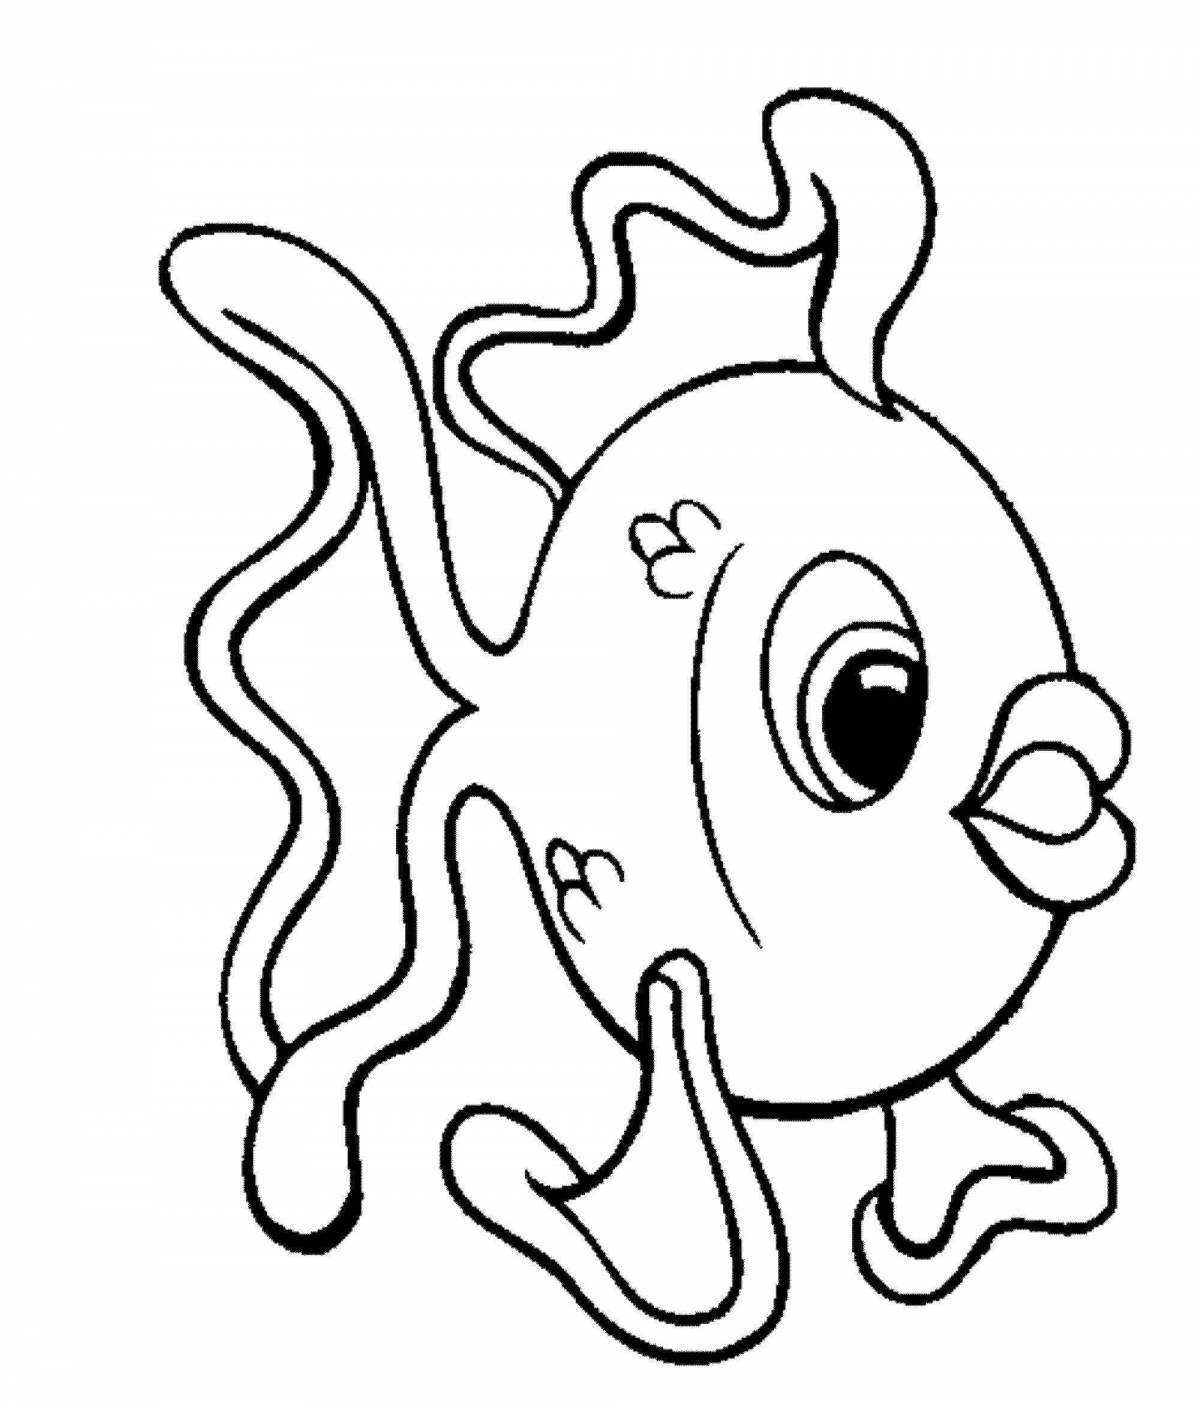 Playful marine life coloring page for 3-4 year olds